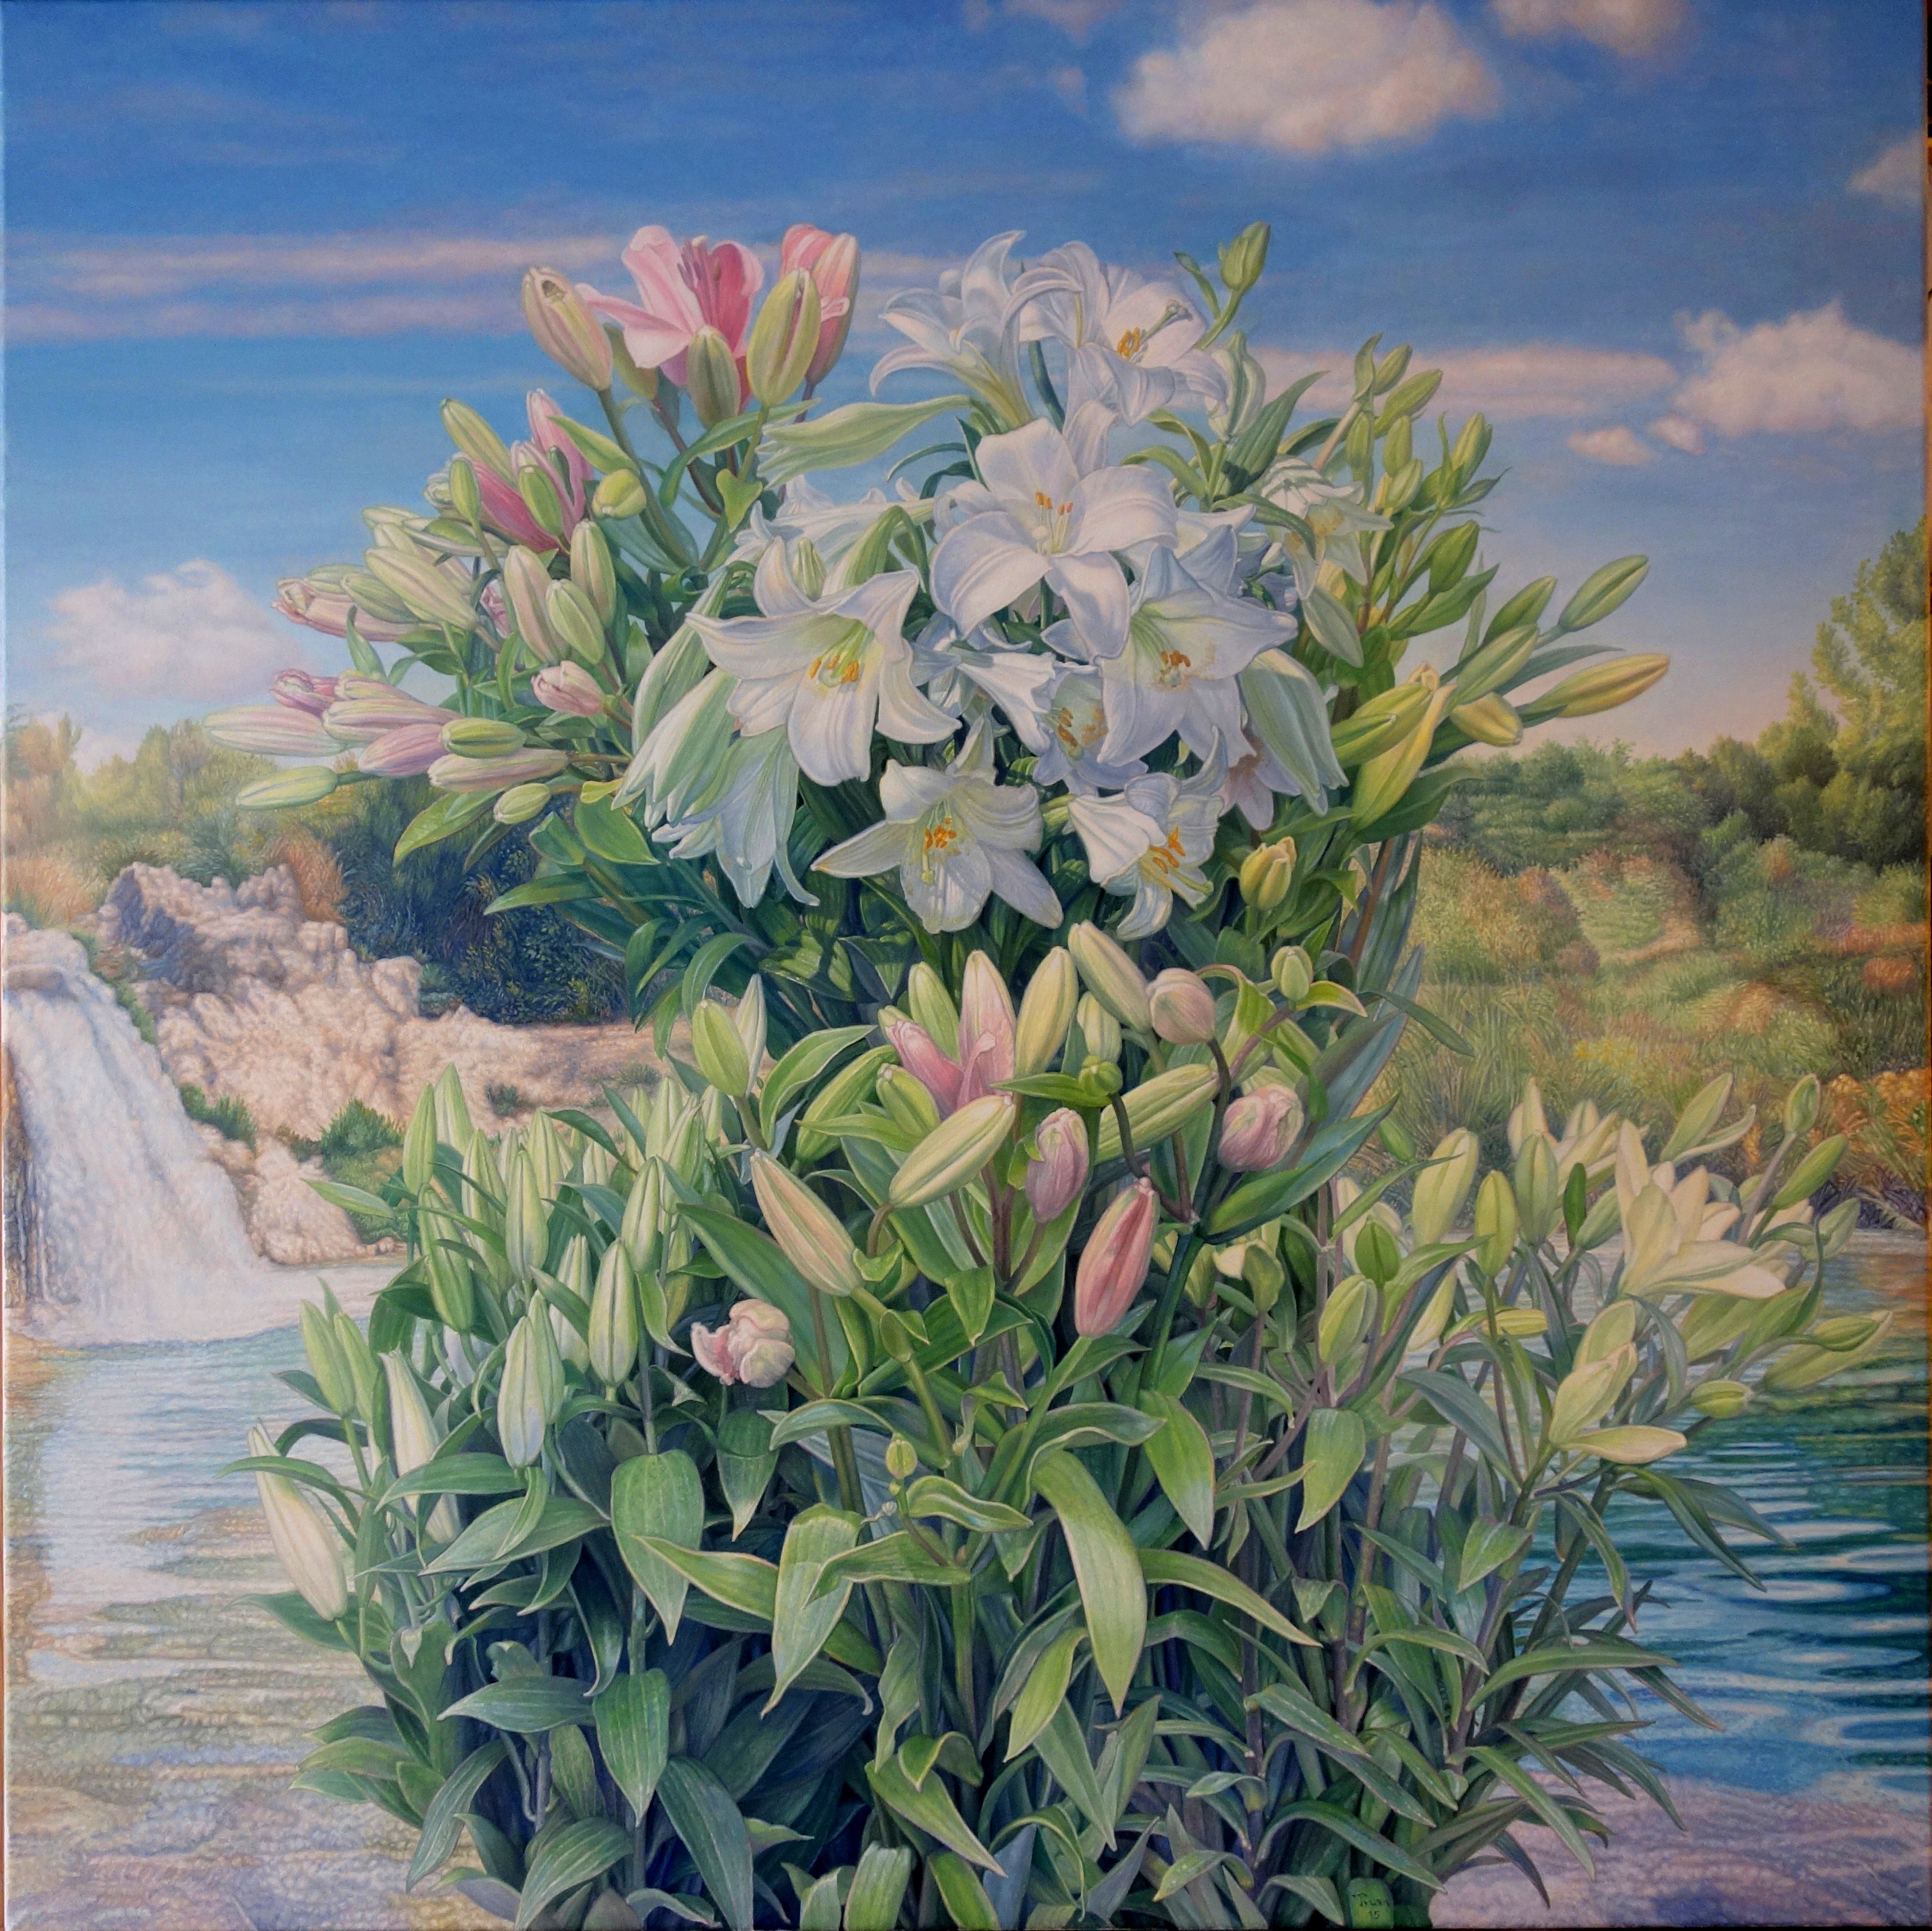 Lilies in the lake,2015 | oil on canvas, 39.3x39.3 in.